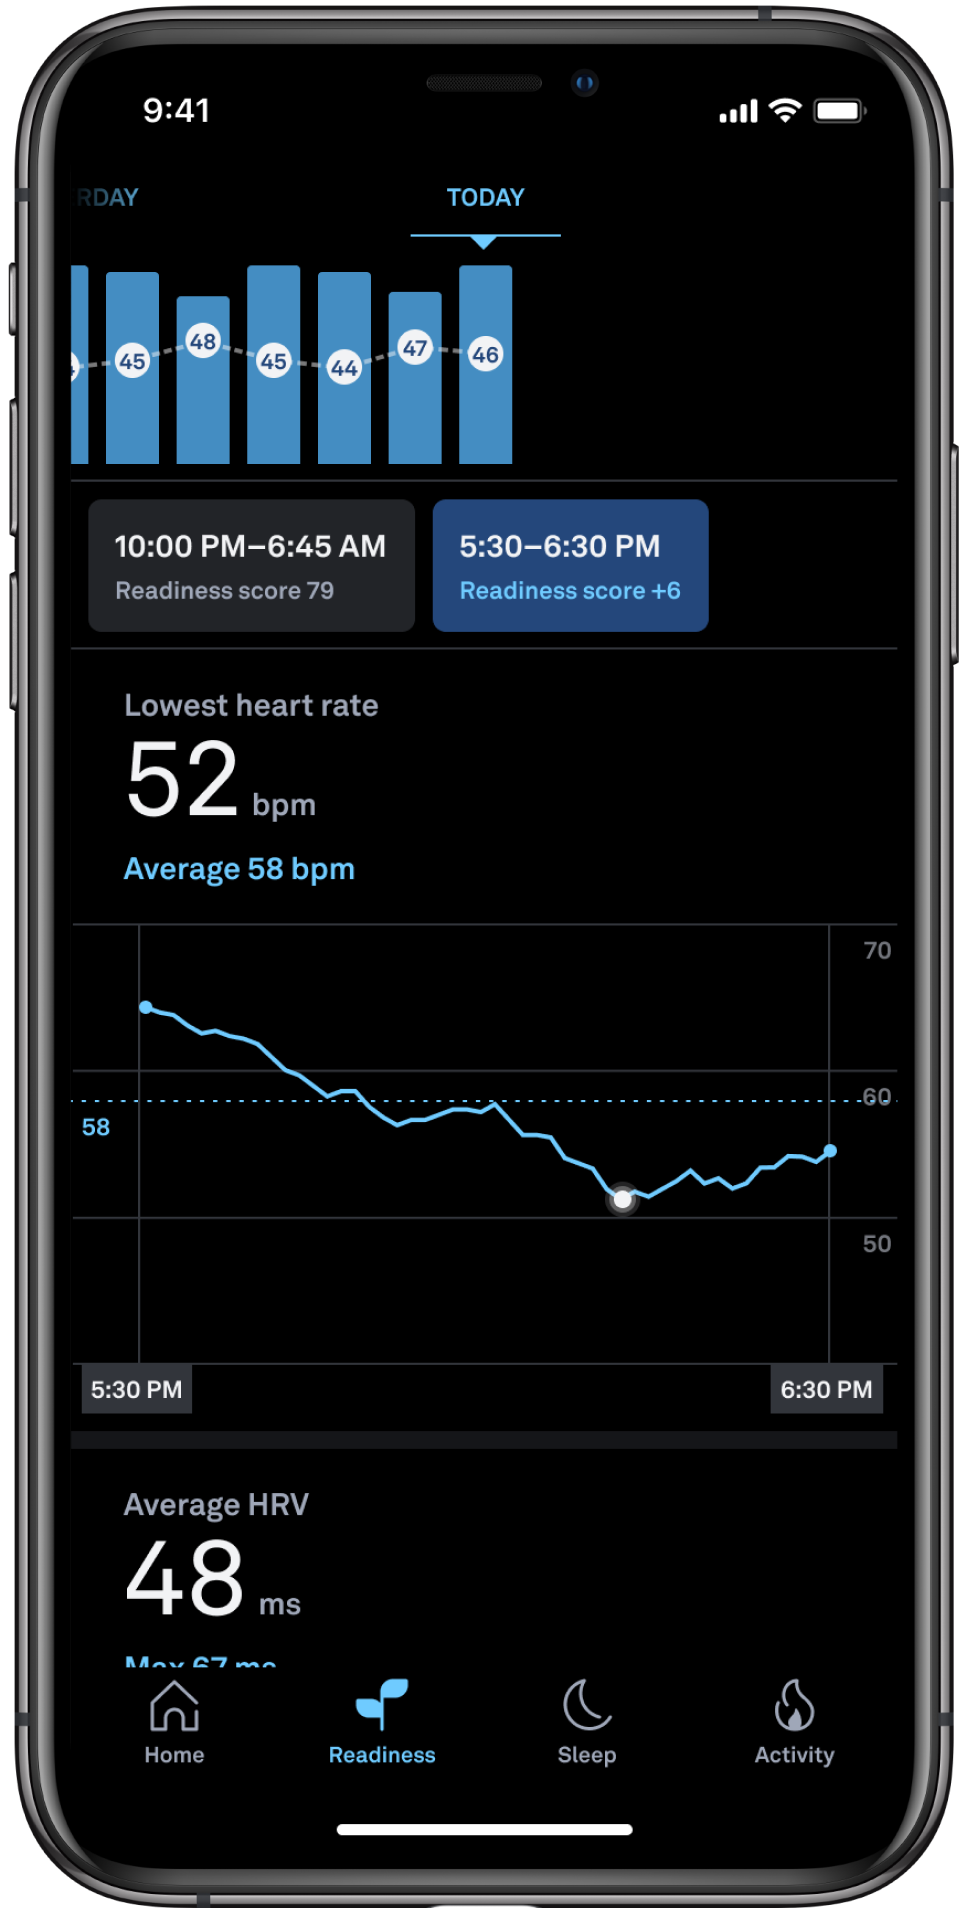 the readiness tab displaying a chart of readiness scores, detected sleep periods, a graph of average heart rate, and the average HRV